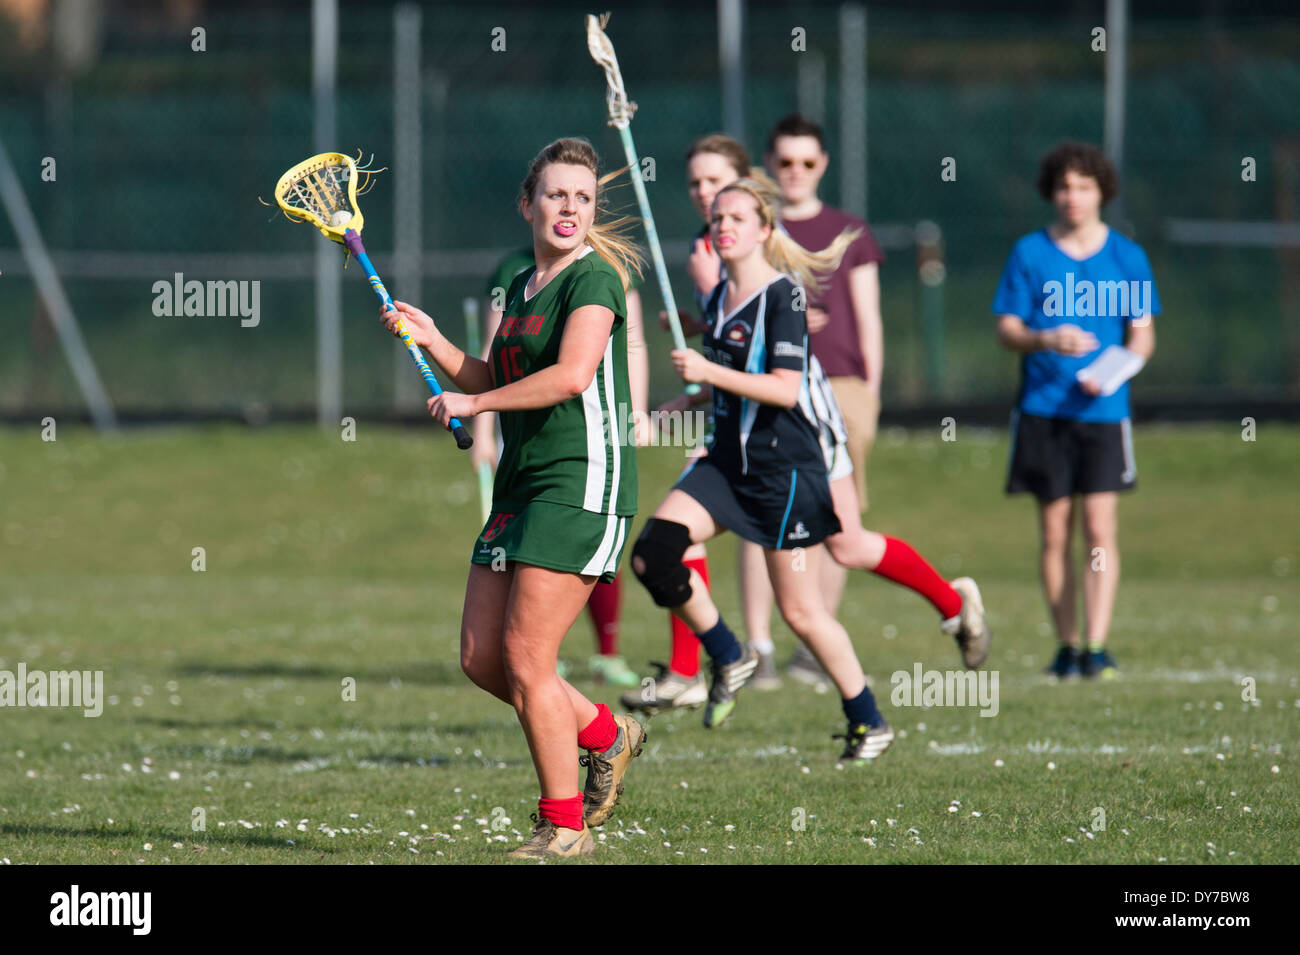 Aberystwyth university women's team (in green) playing lacrosse against Plymouth University, Wales UK Stock Photo